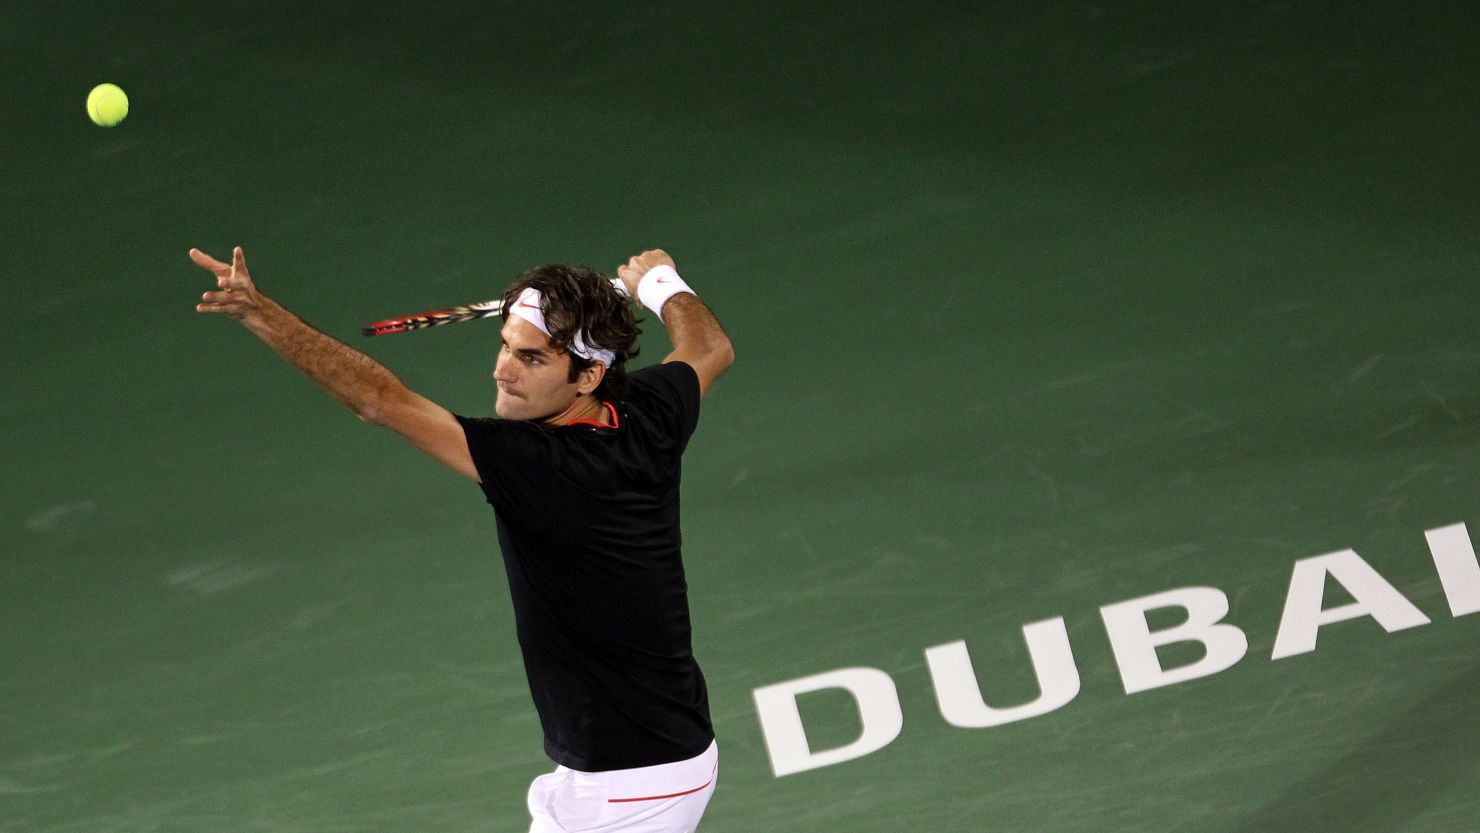 Roger Federer stayed on course for a fifth Dubai title with a first round victory over Michael Llodra